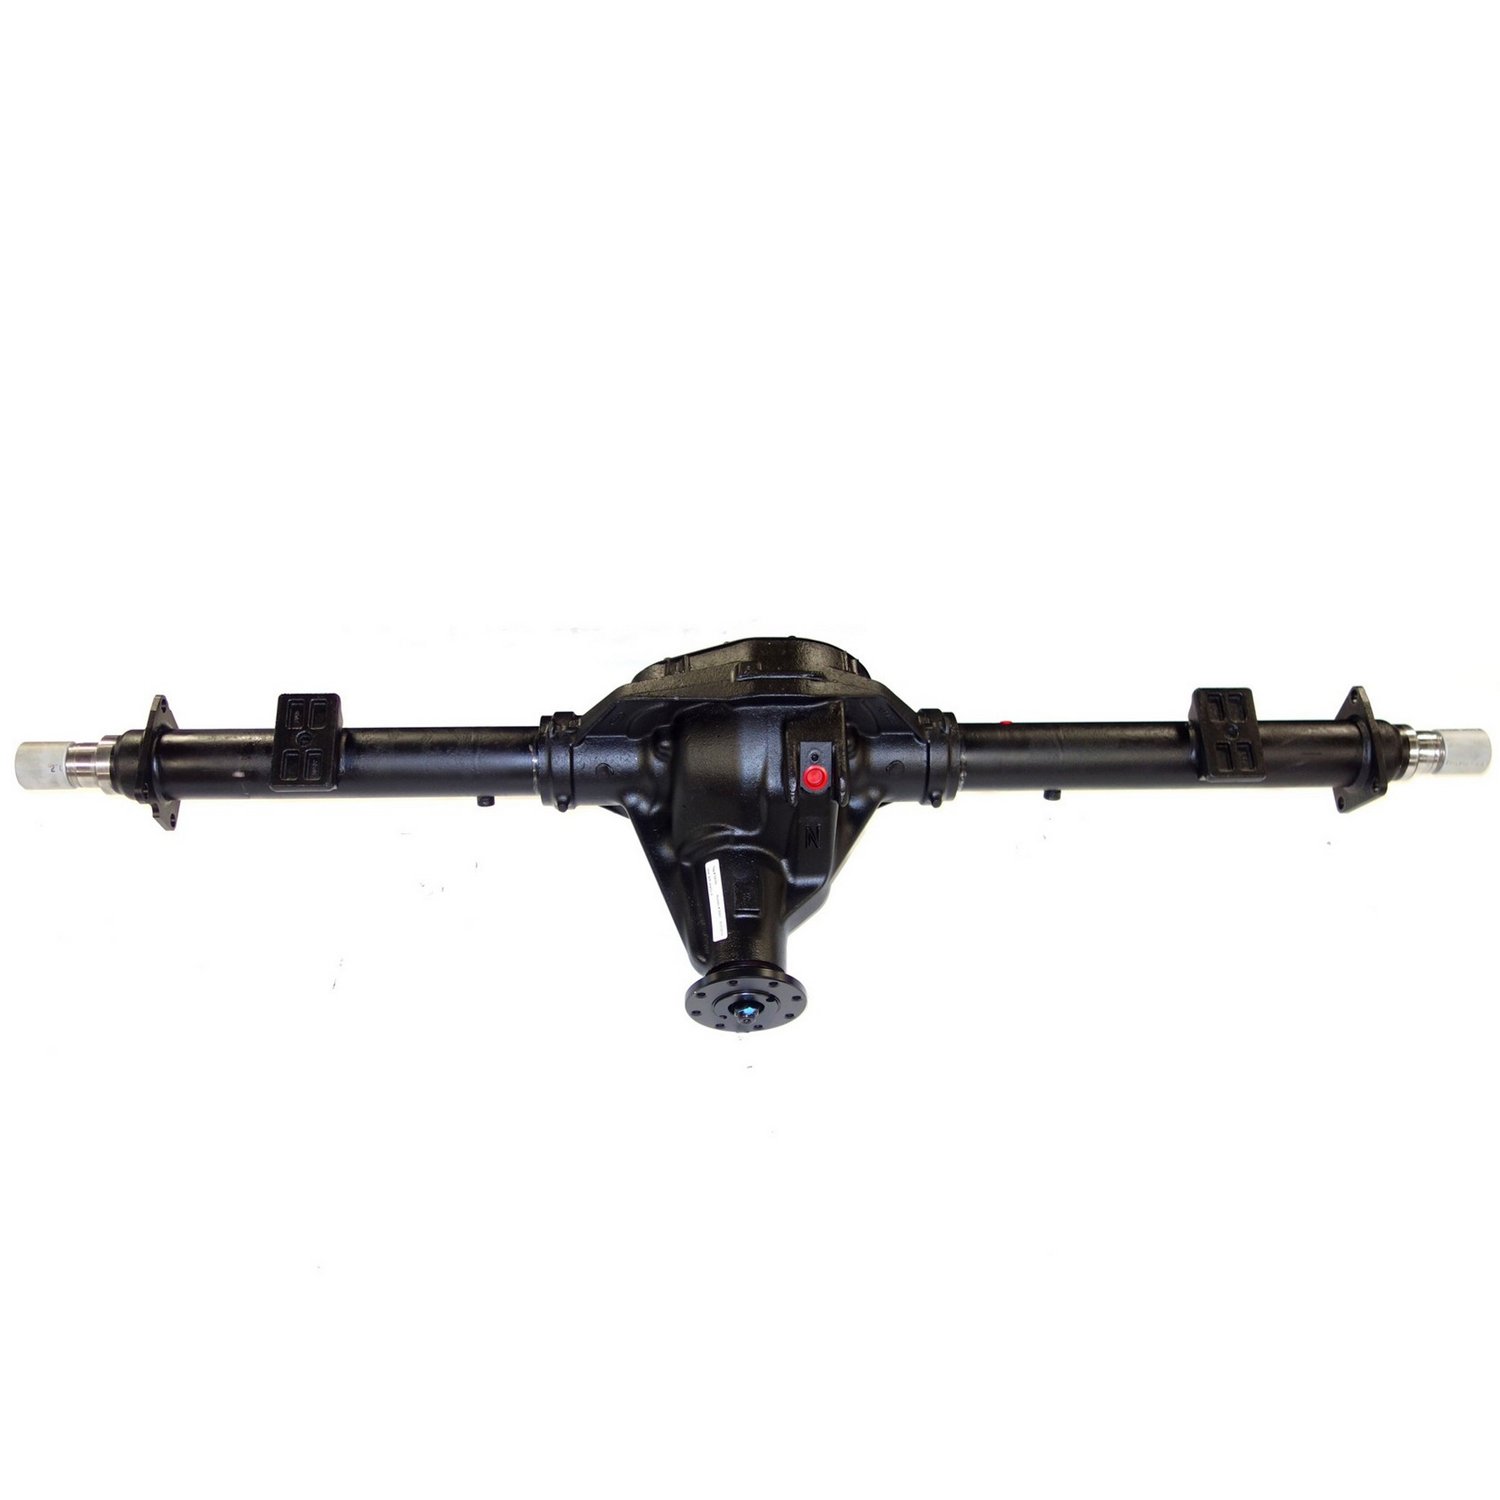 Remanufactured Axle Assy for 10.5" 99-00 F250 & F350 4.30, SRW, Posi LSD *Check Tag*